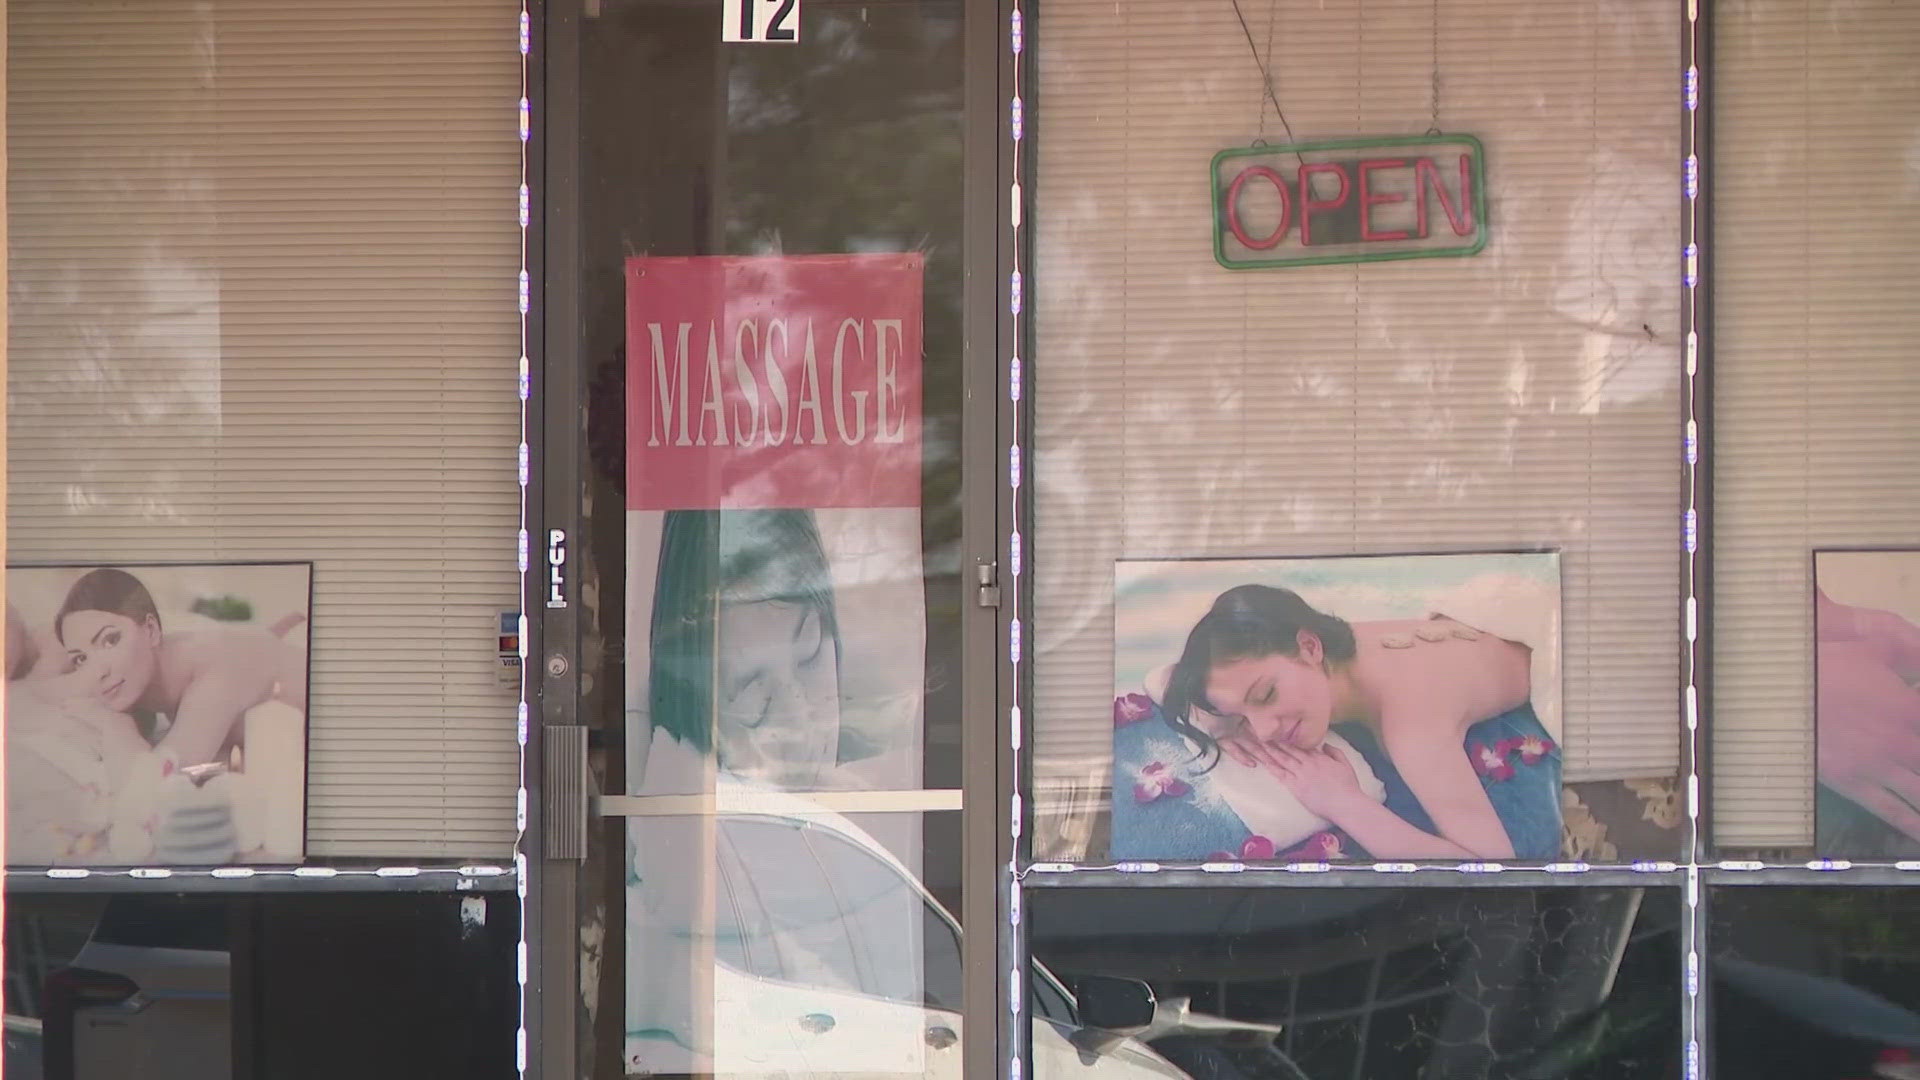 A massage business in north Houston has been permanently closed along with seven other similar establishments amid suspicions of human trafficking.